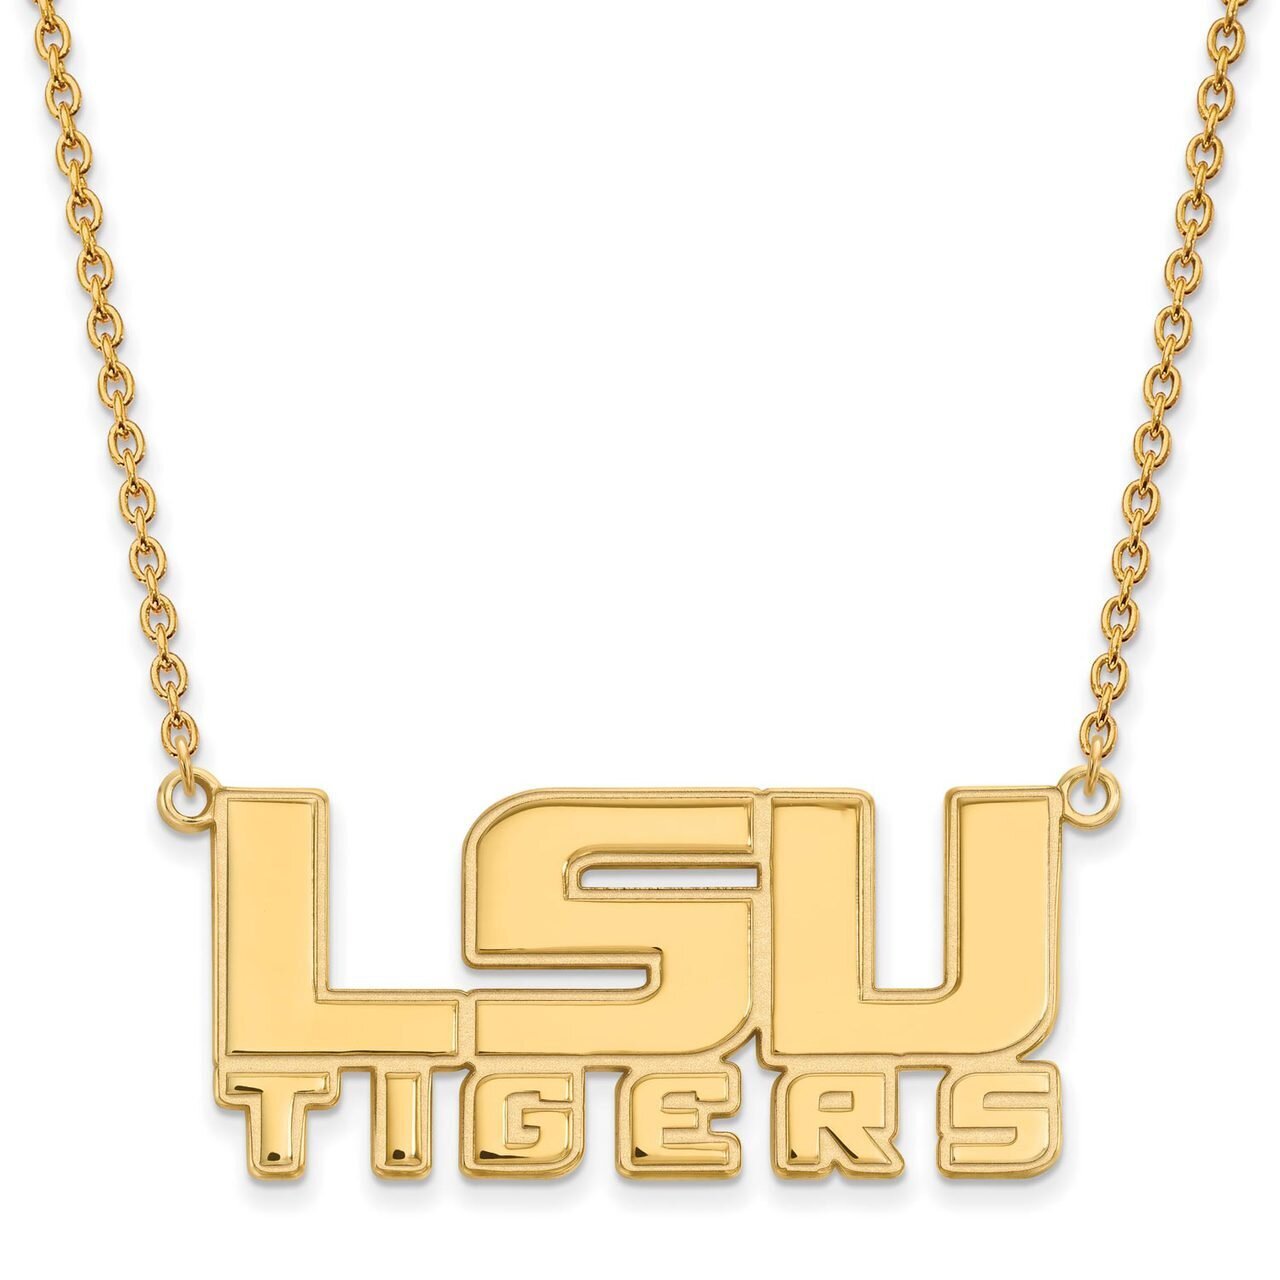 Louisiana State University Large Pendant with Chain Necklace 14k Yellow Gold 4Y048LSU-18